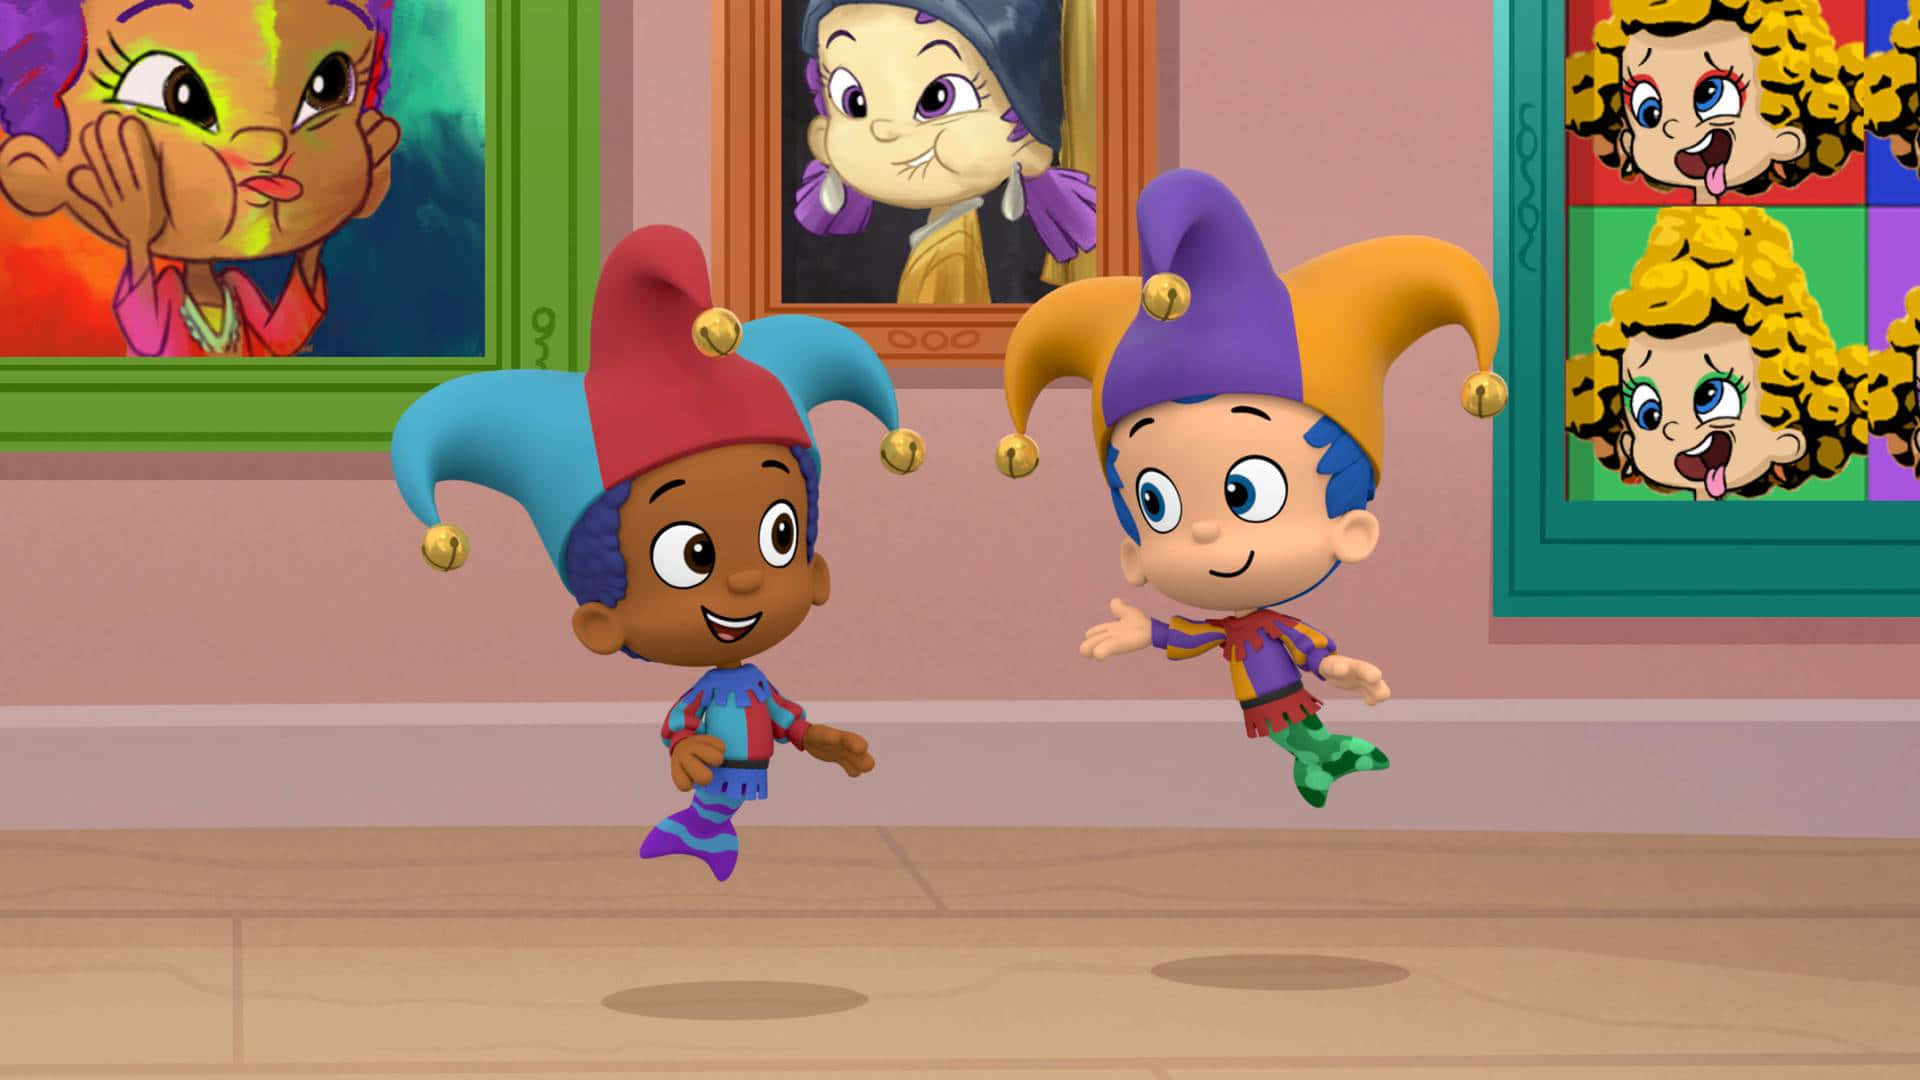 Come join our bubble-filled underwater adventure with the Bubble Guppies